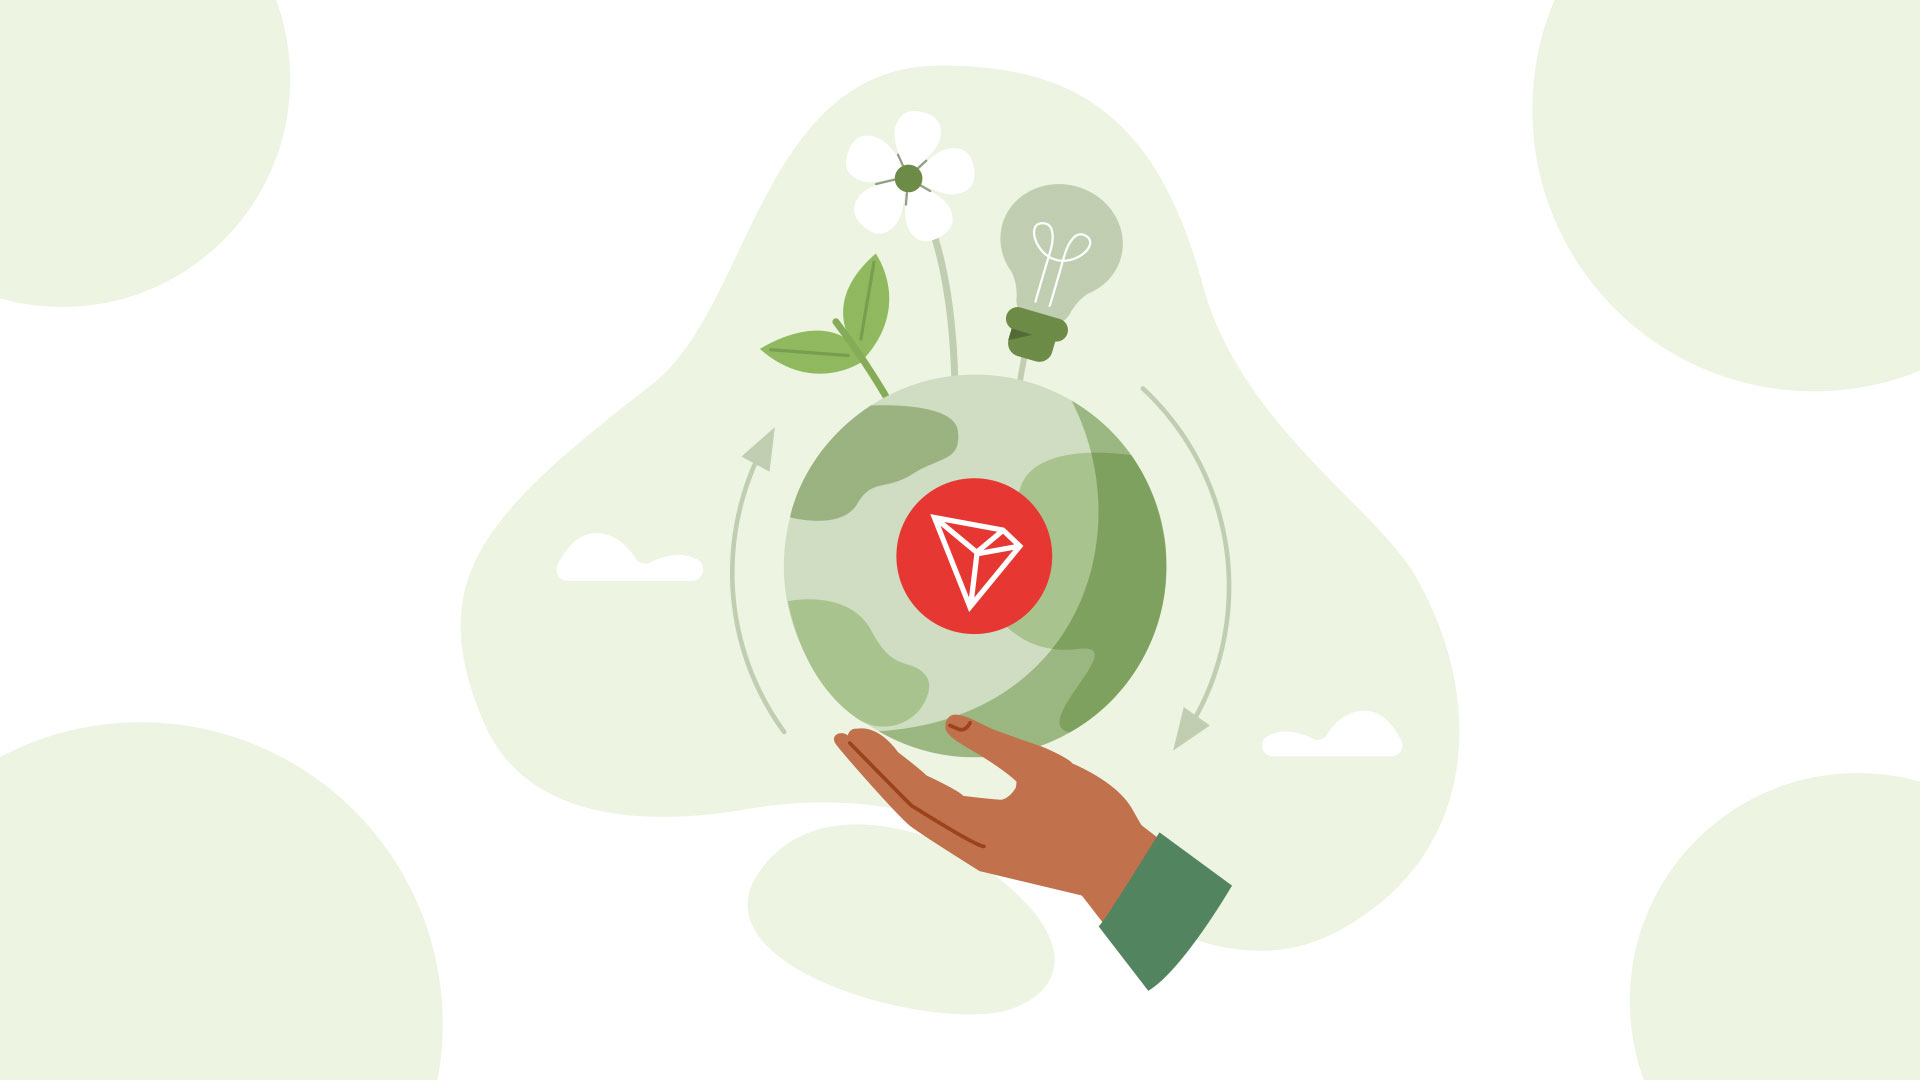 How Eco-Friendly is TRON?